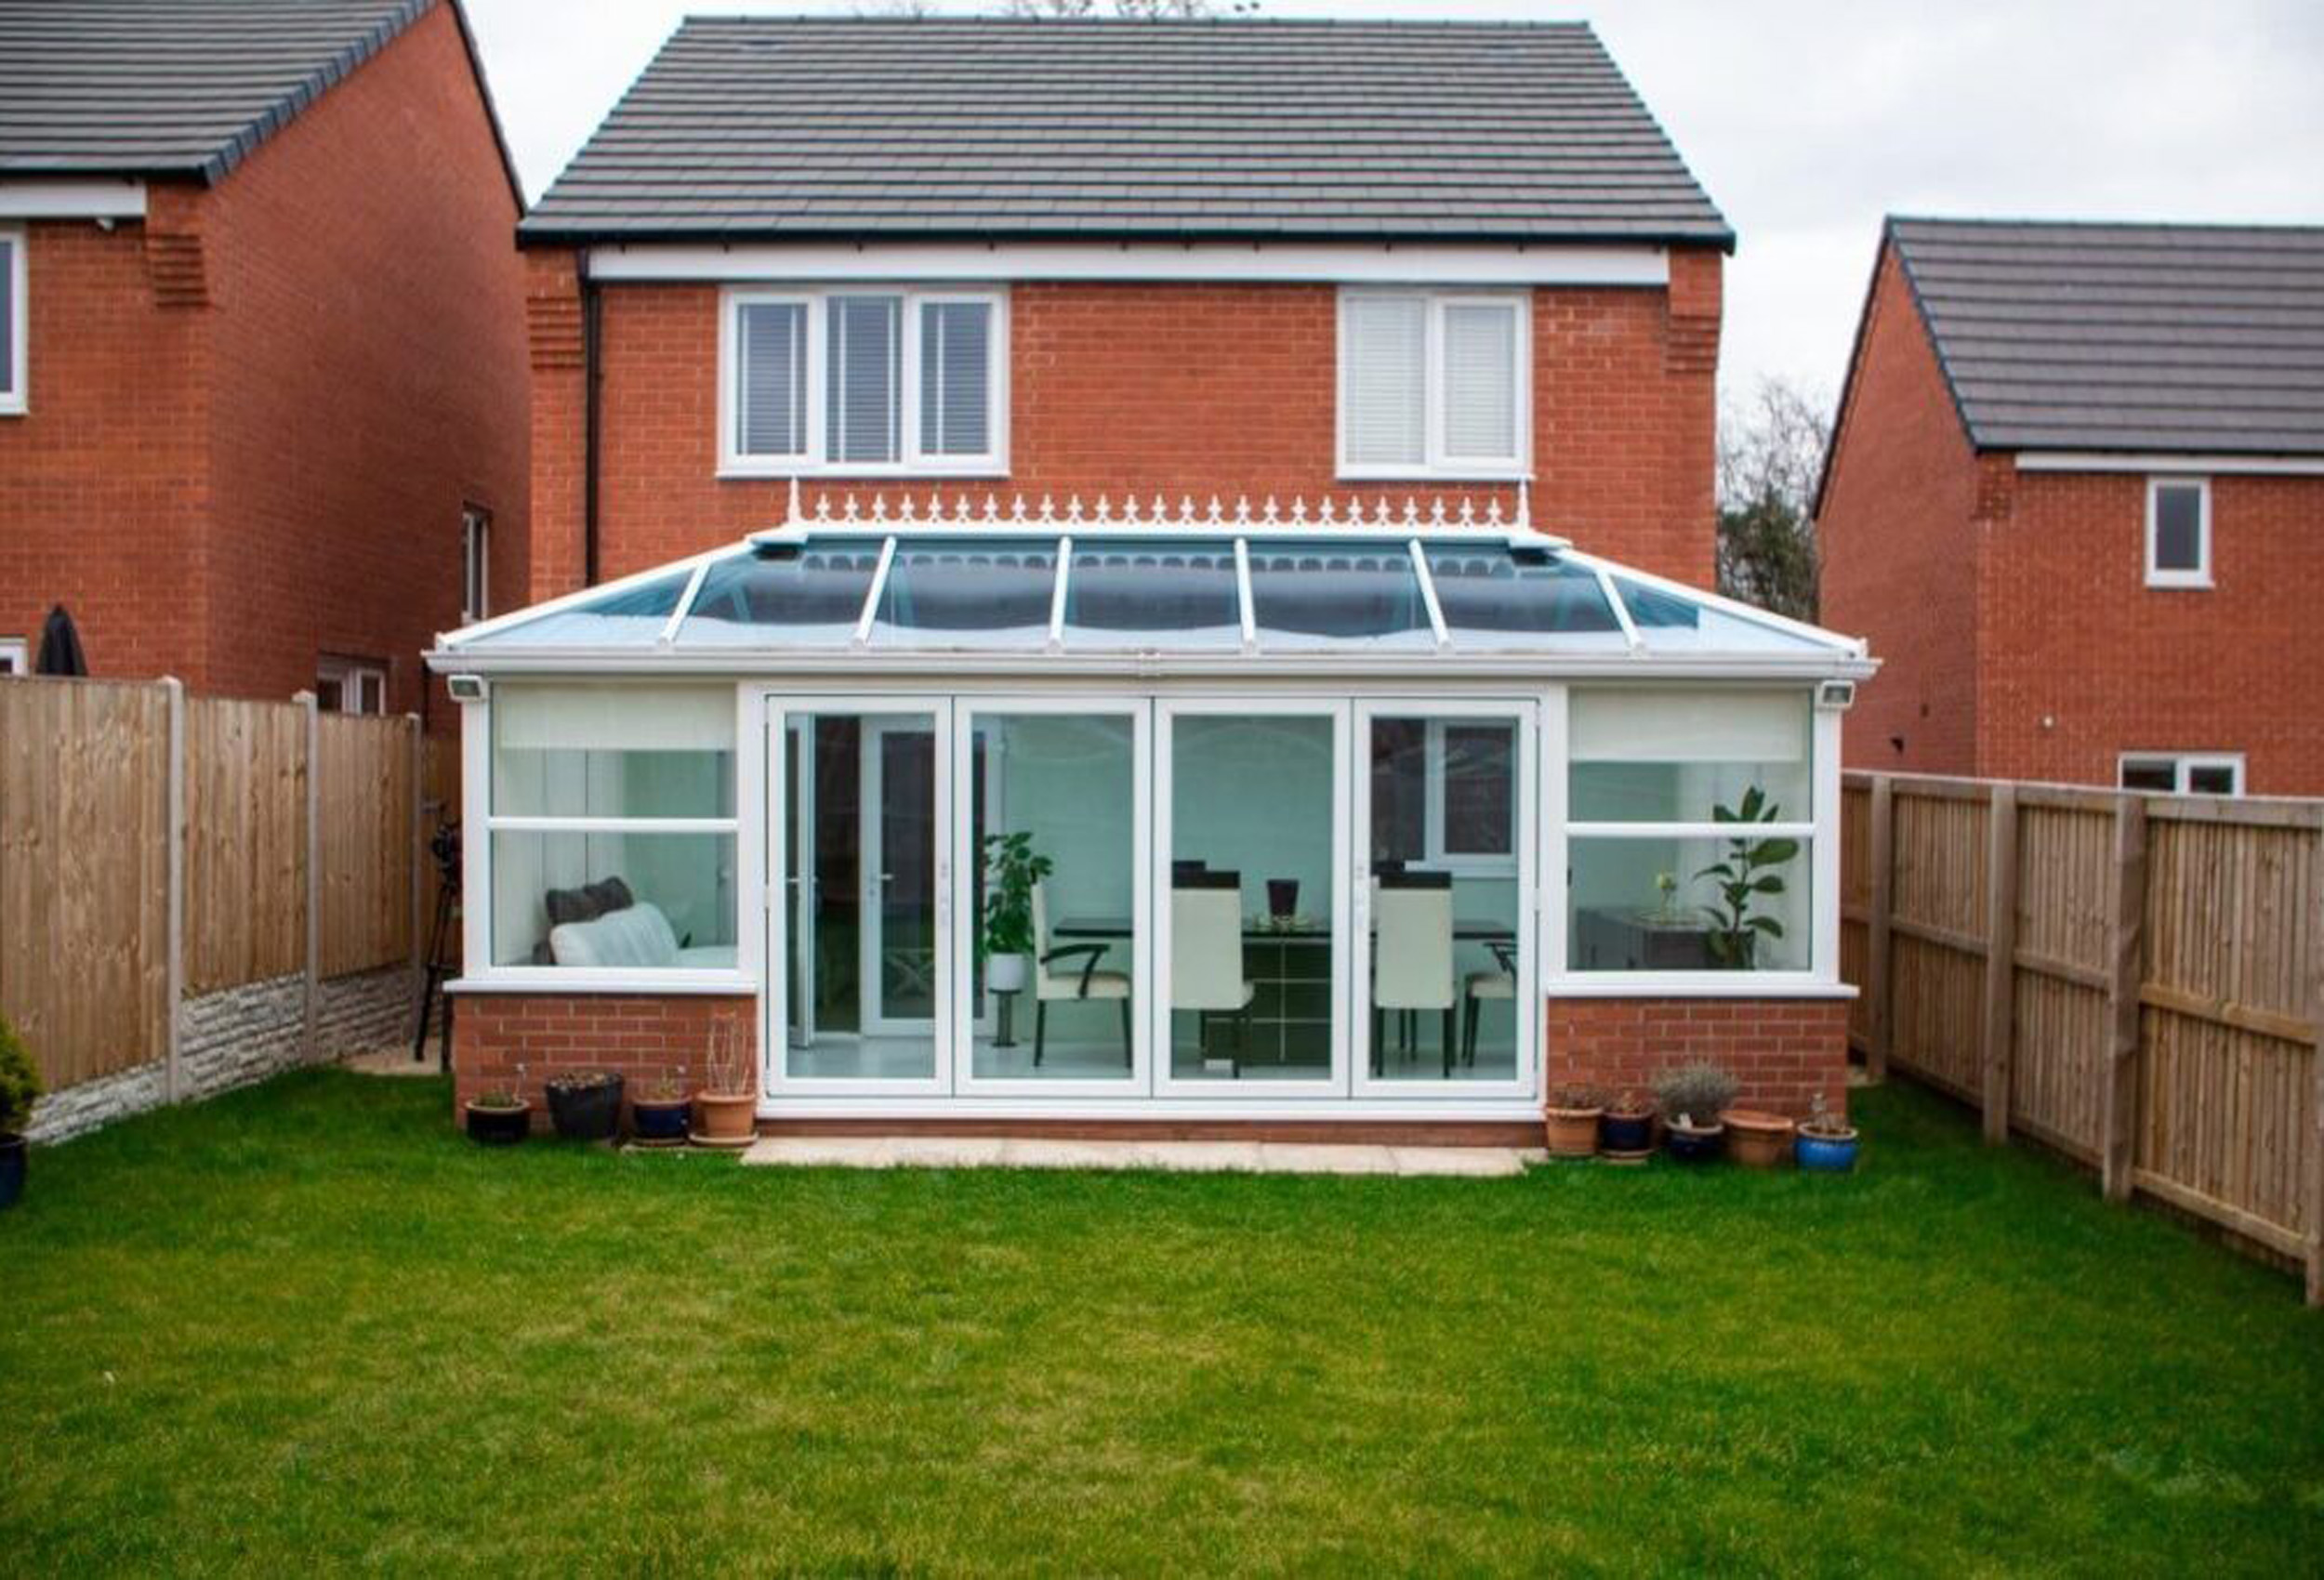 5 Compelling Reasons to Add a Conservatory to Your Home